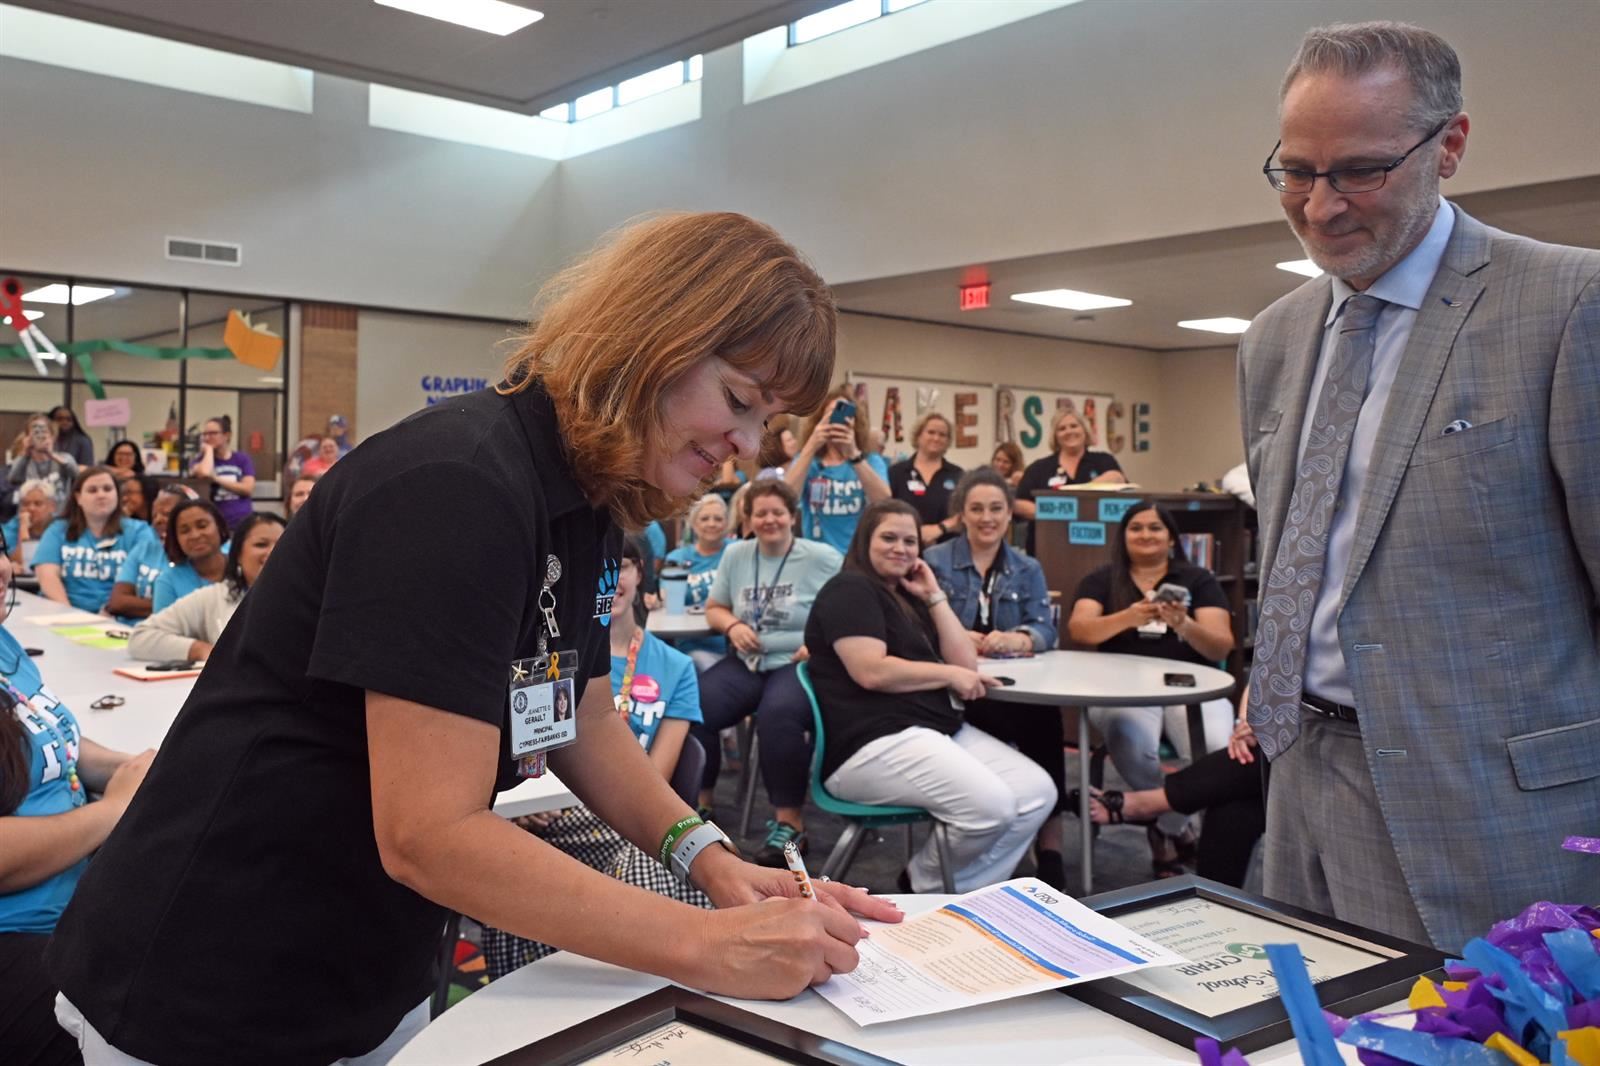 Dr. Jeanette Gerault, Fiest principal, left, signs an Adopt-a-School partnership agreement.